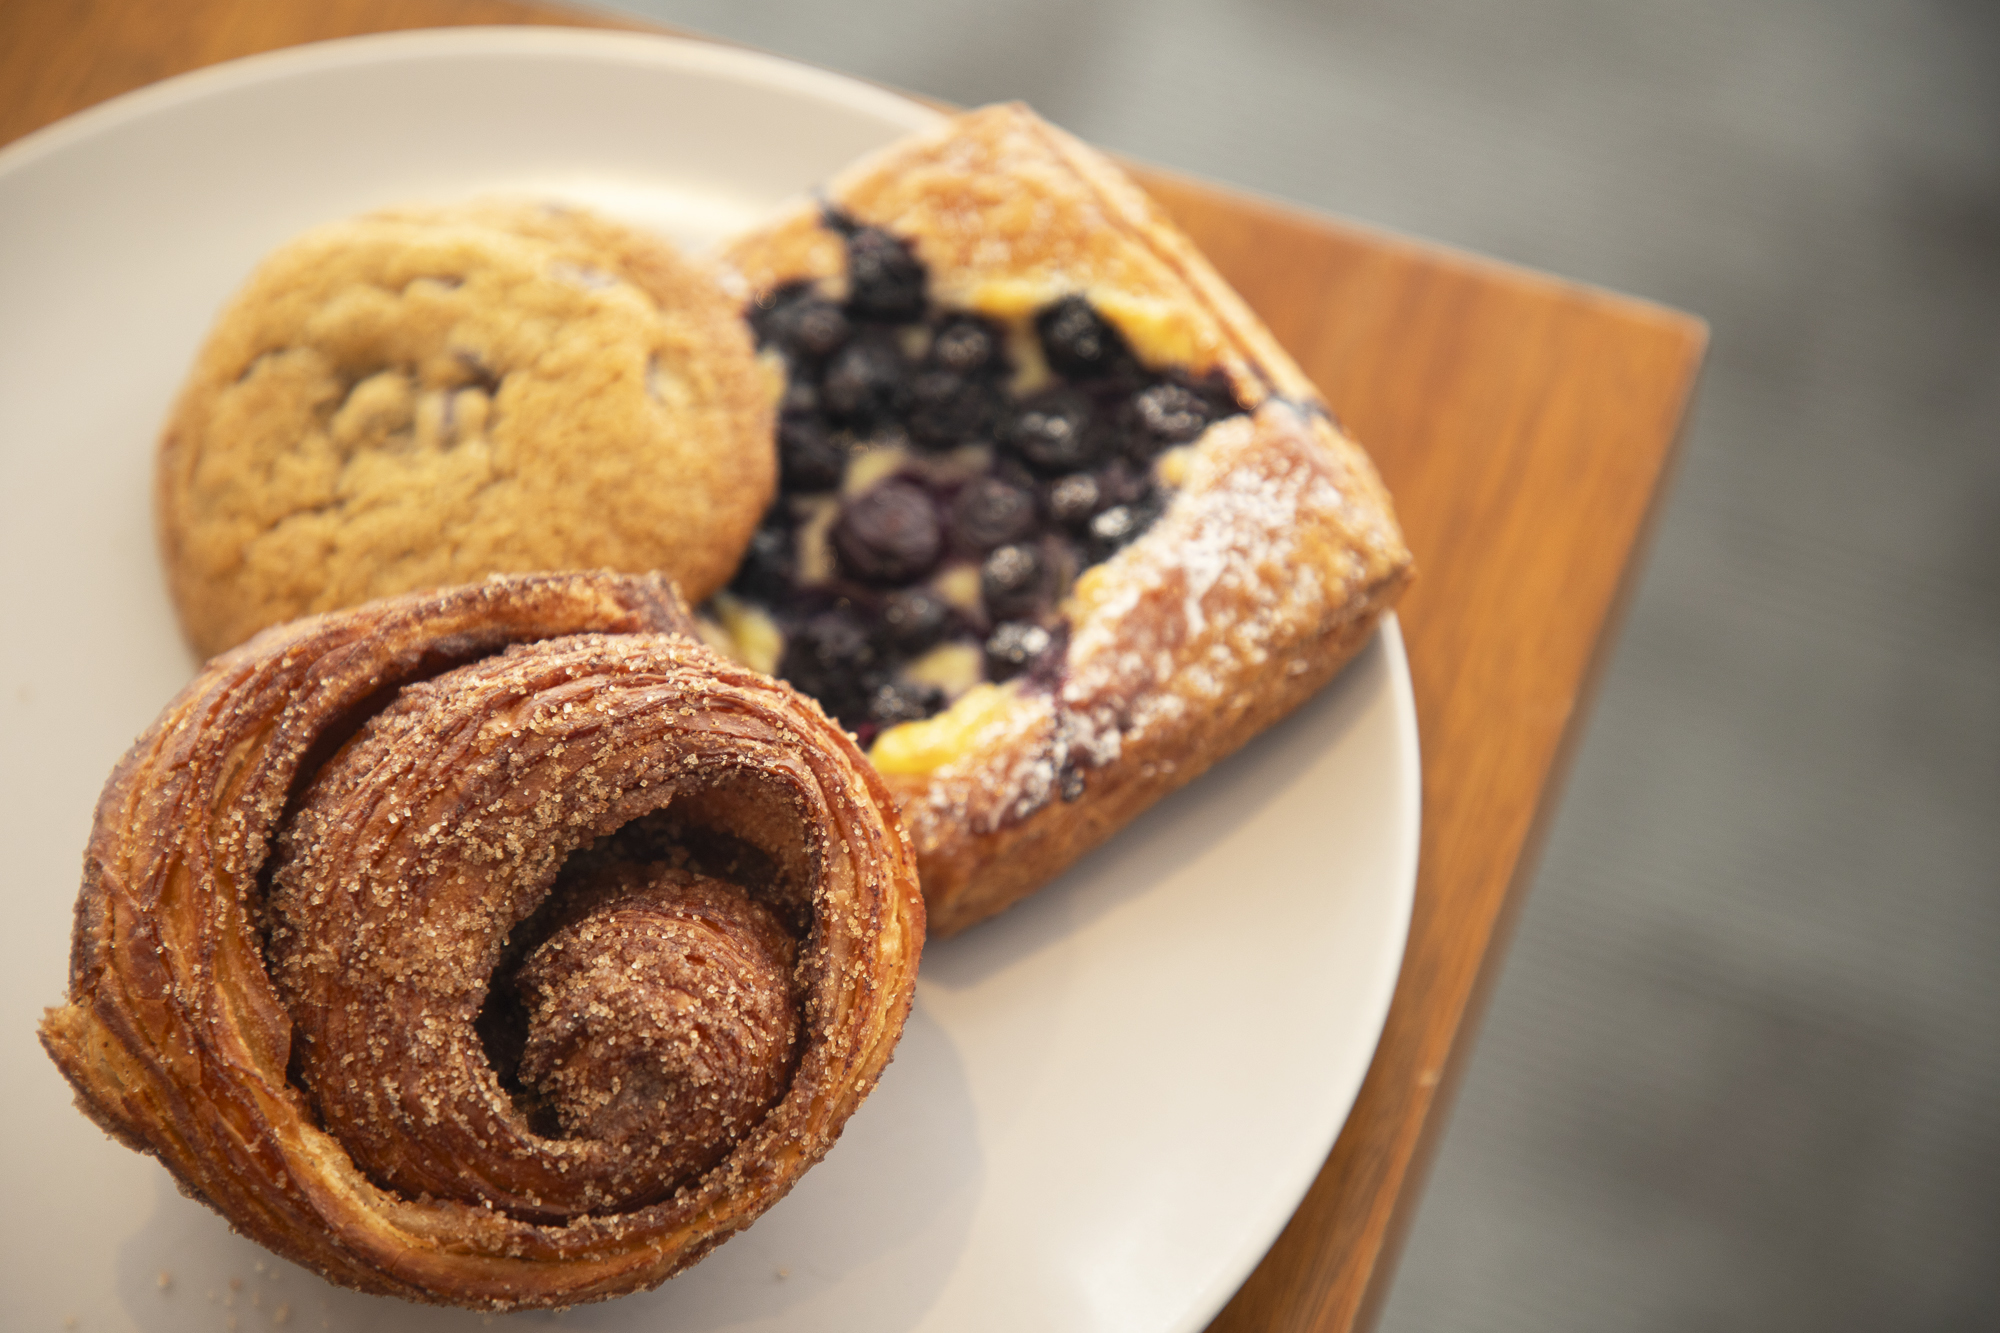 A morning bun, chocolate chip cookie and blueberry and cheese danish sit on a gray plate.